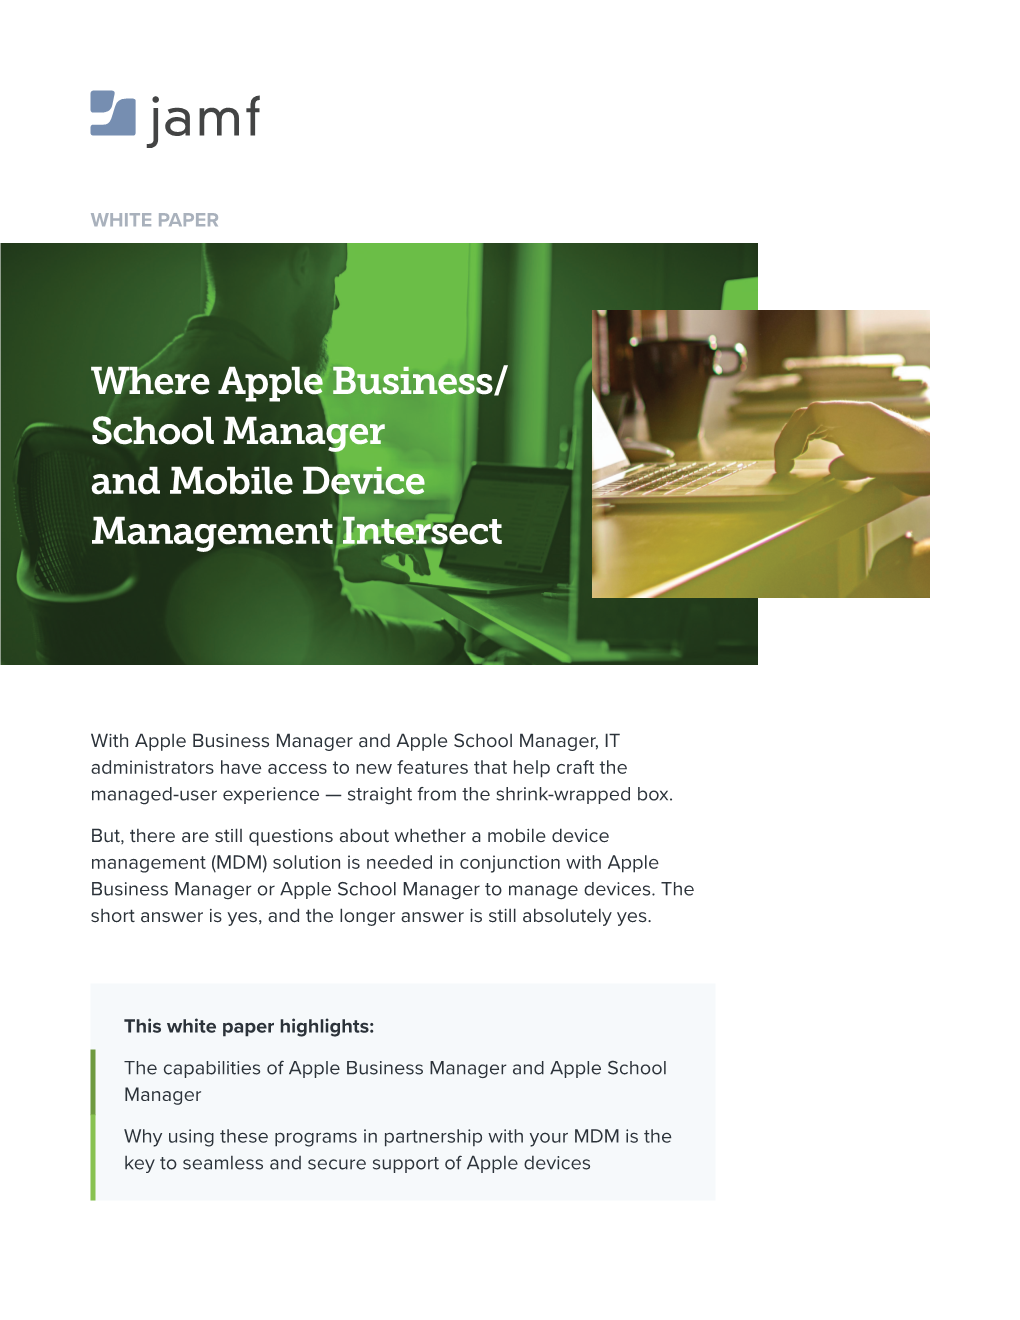 Where Apple Business/ School Manager and Mobile Device Management Intersect